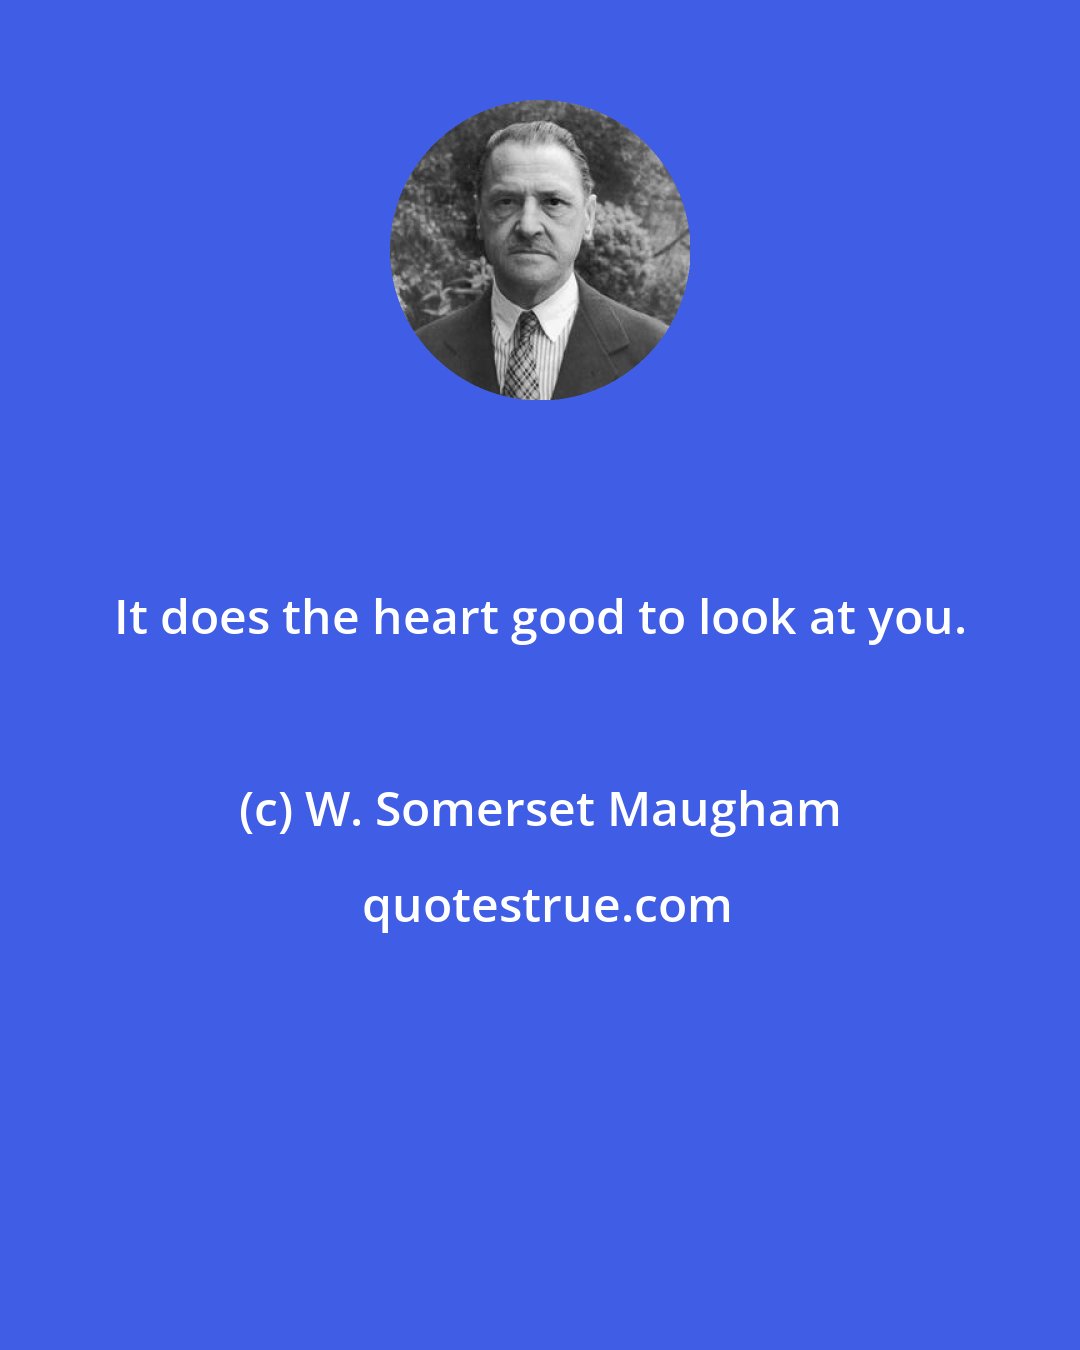 W. Somerset Maugham: It does the heart good to look at you.